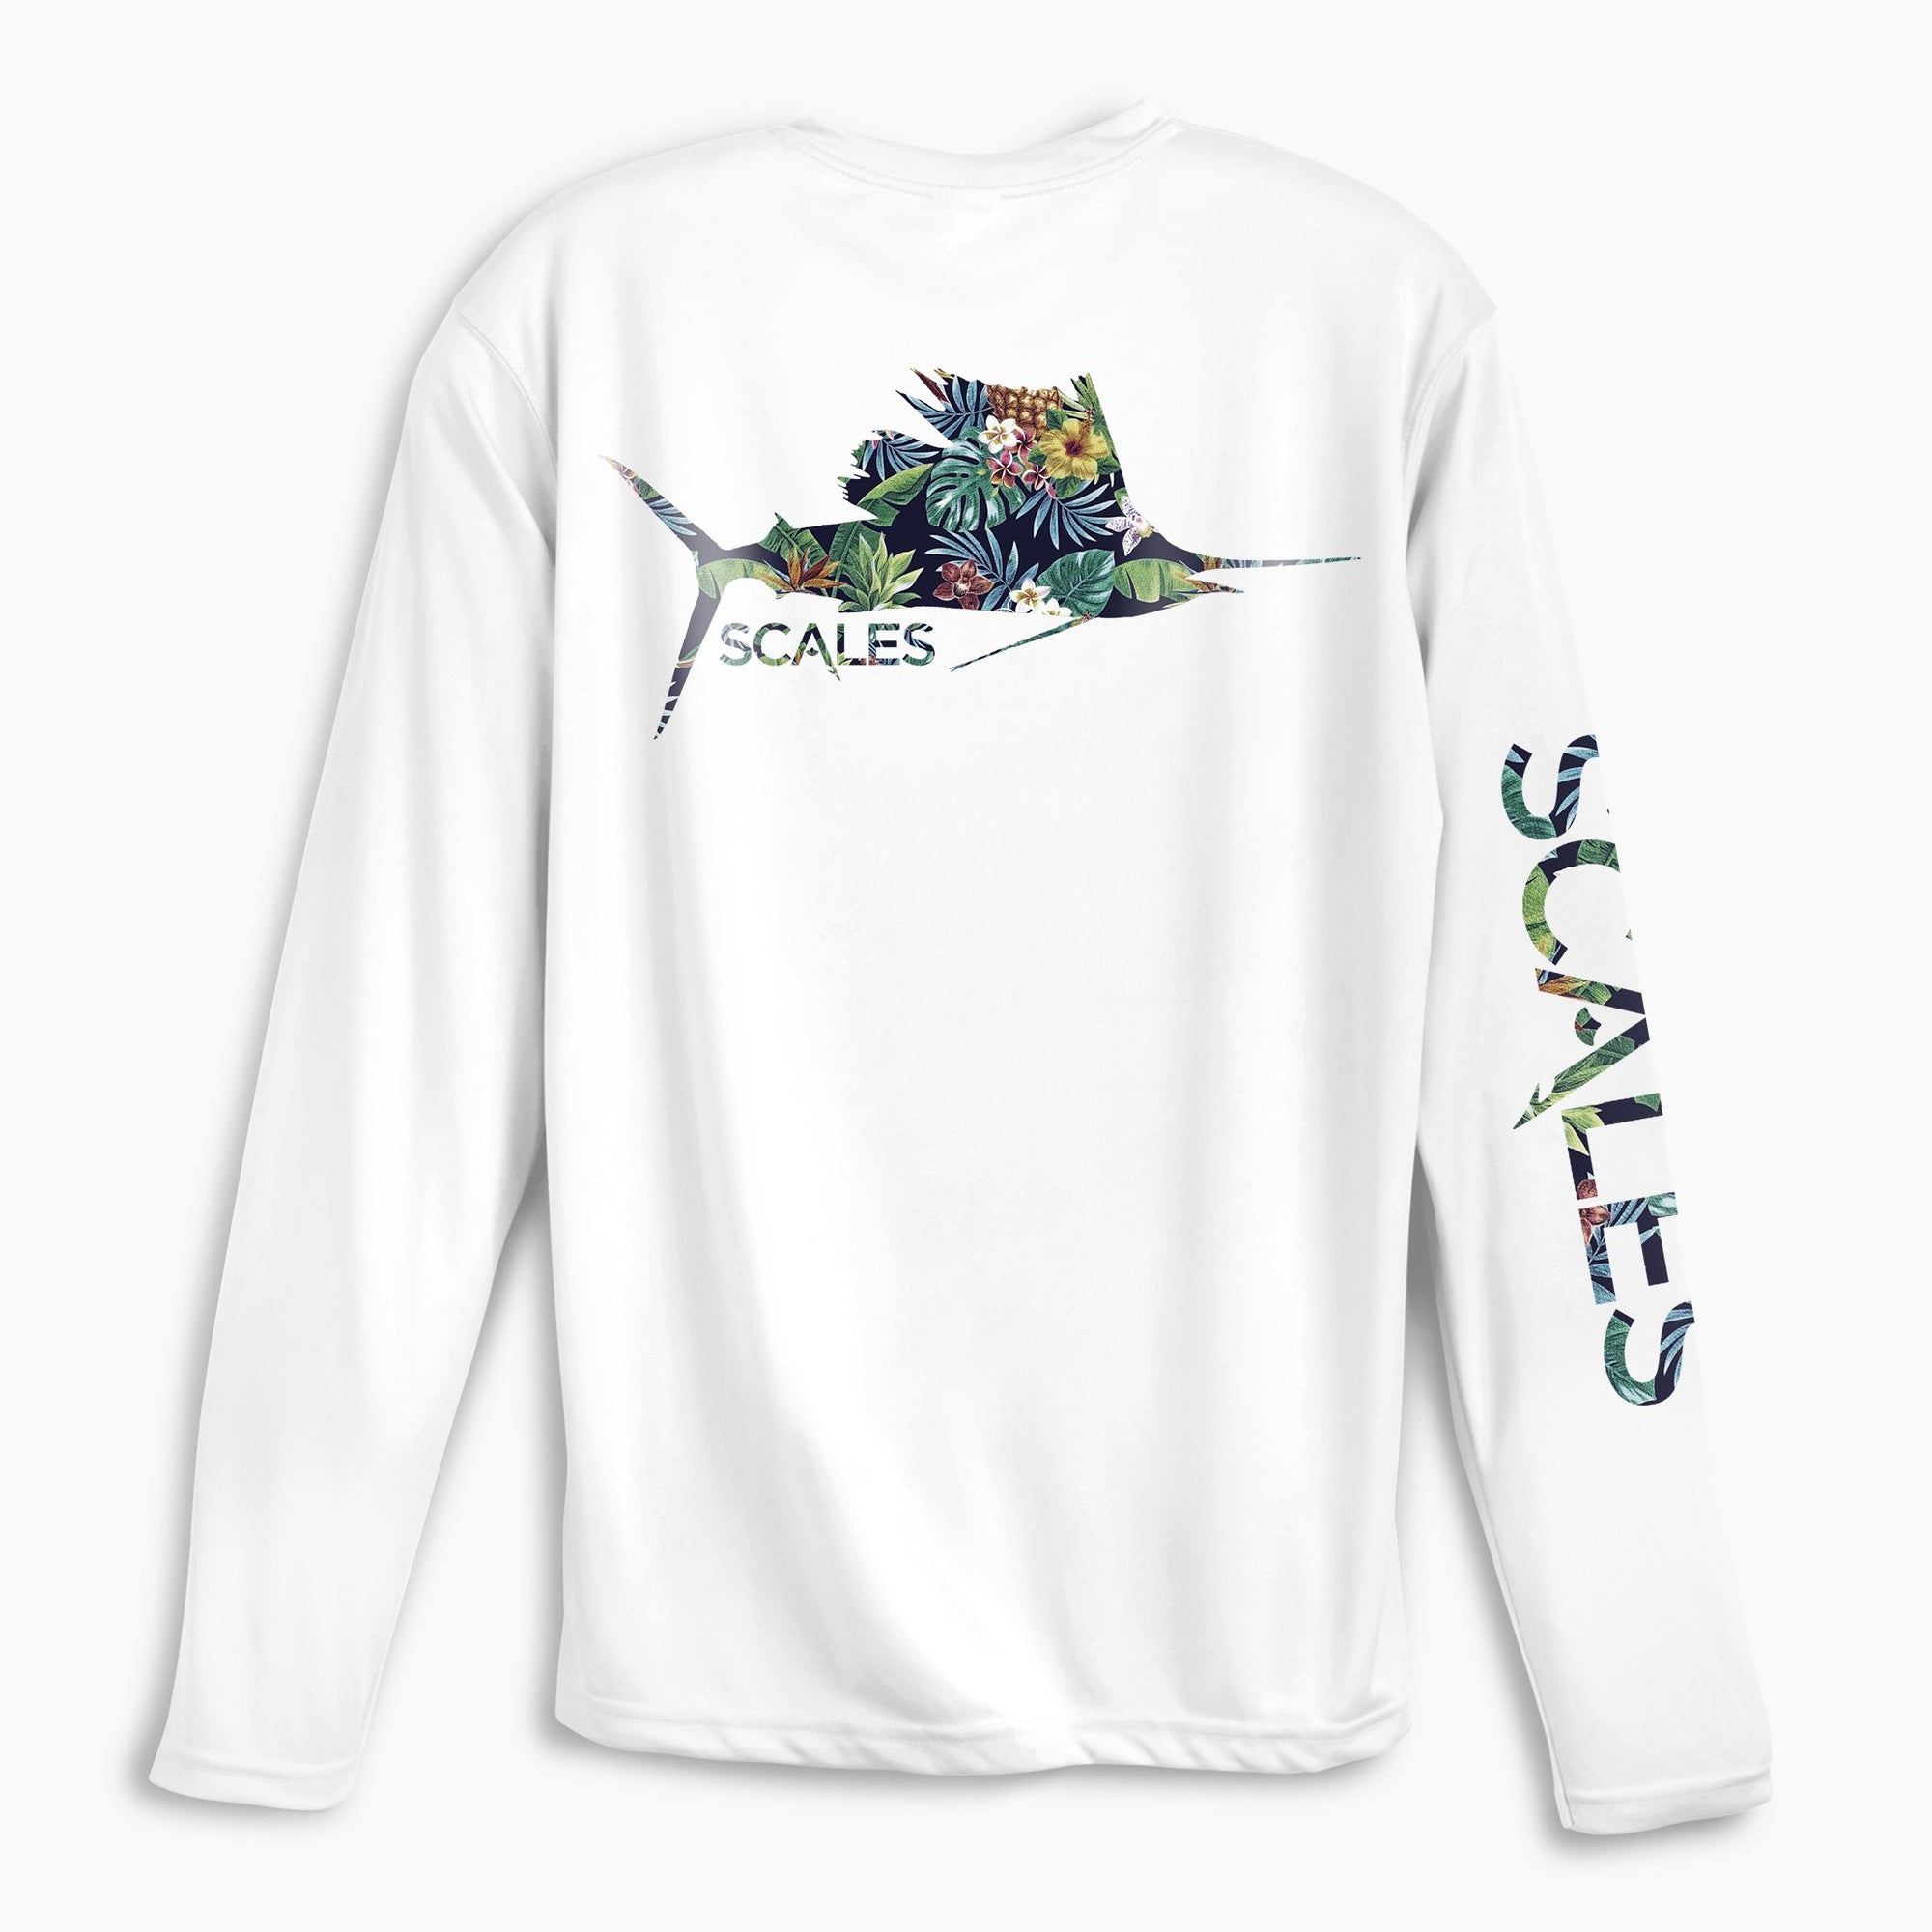 Scales Gear Pro Performance Tropical Sail Crew White Shirt - Front View